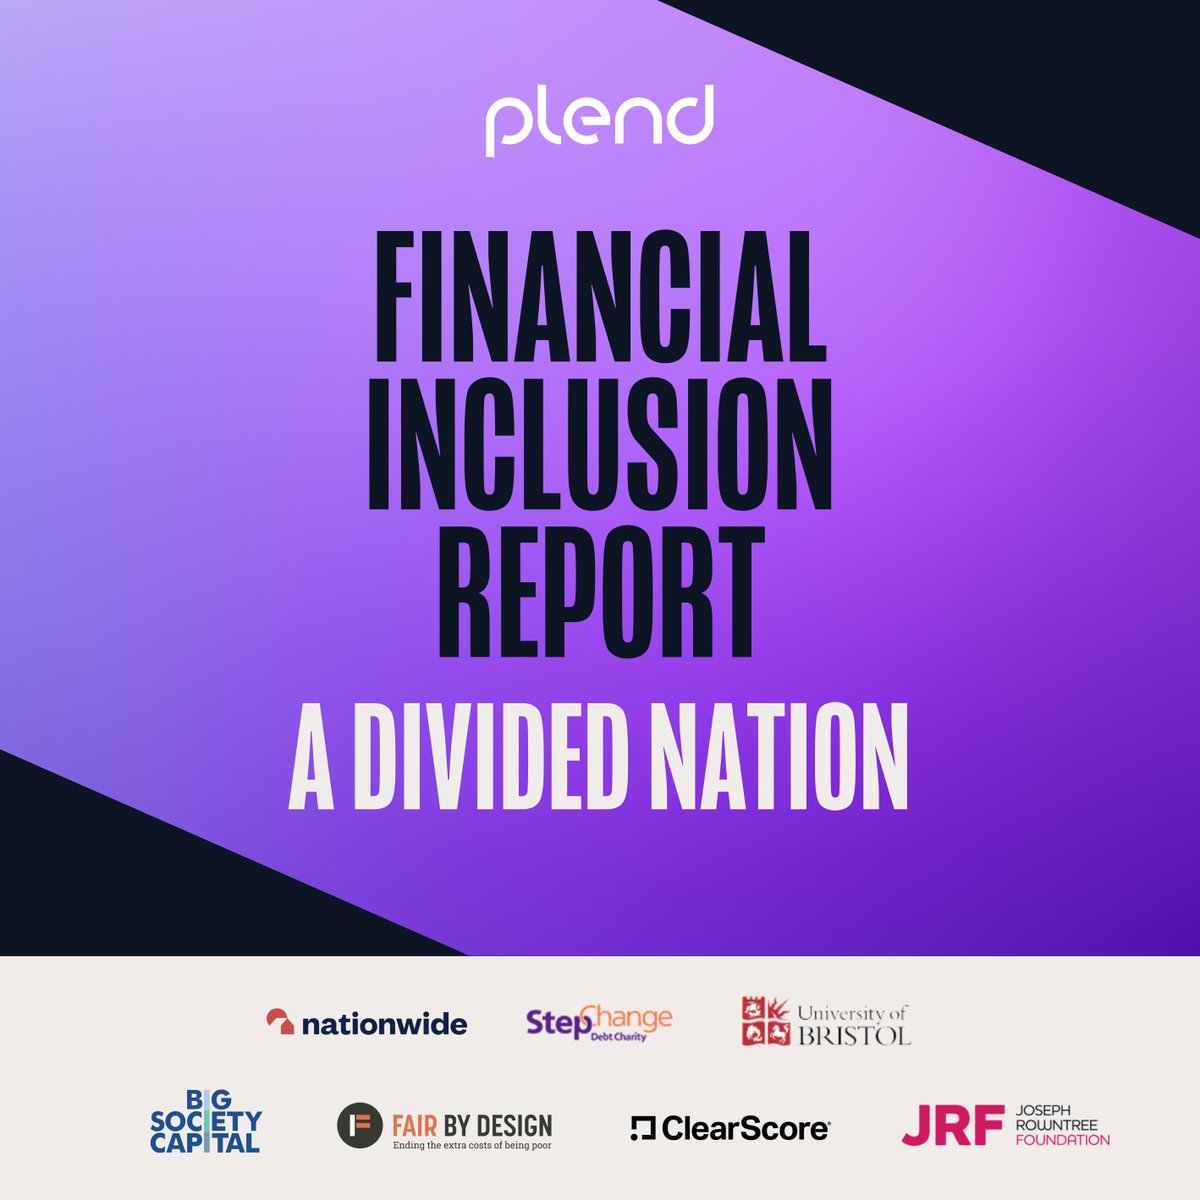 📢 @plend_uk's new Financial Inclusion Report, with foreward from @Y_FovargueMP, recommends a #FairBankingAct as having 'the potential to transform our financial system and the lives of millions of people in the UK'. #FairBankingForAll plend.com/inclusion-repo…